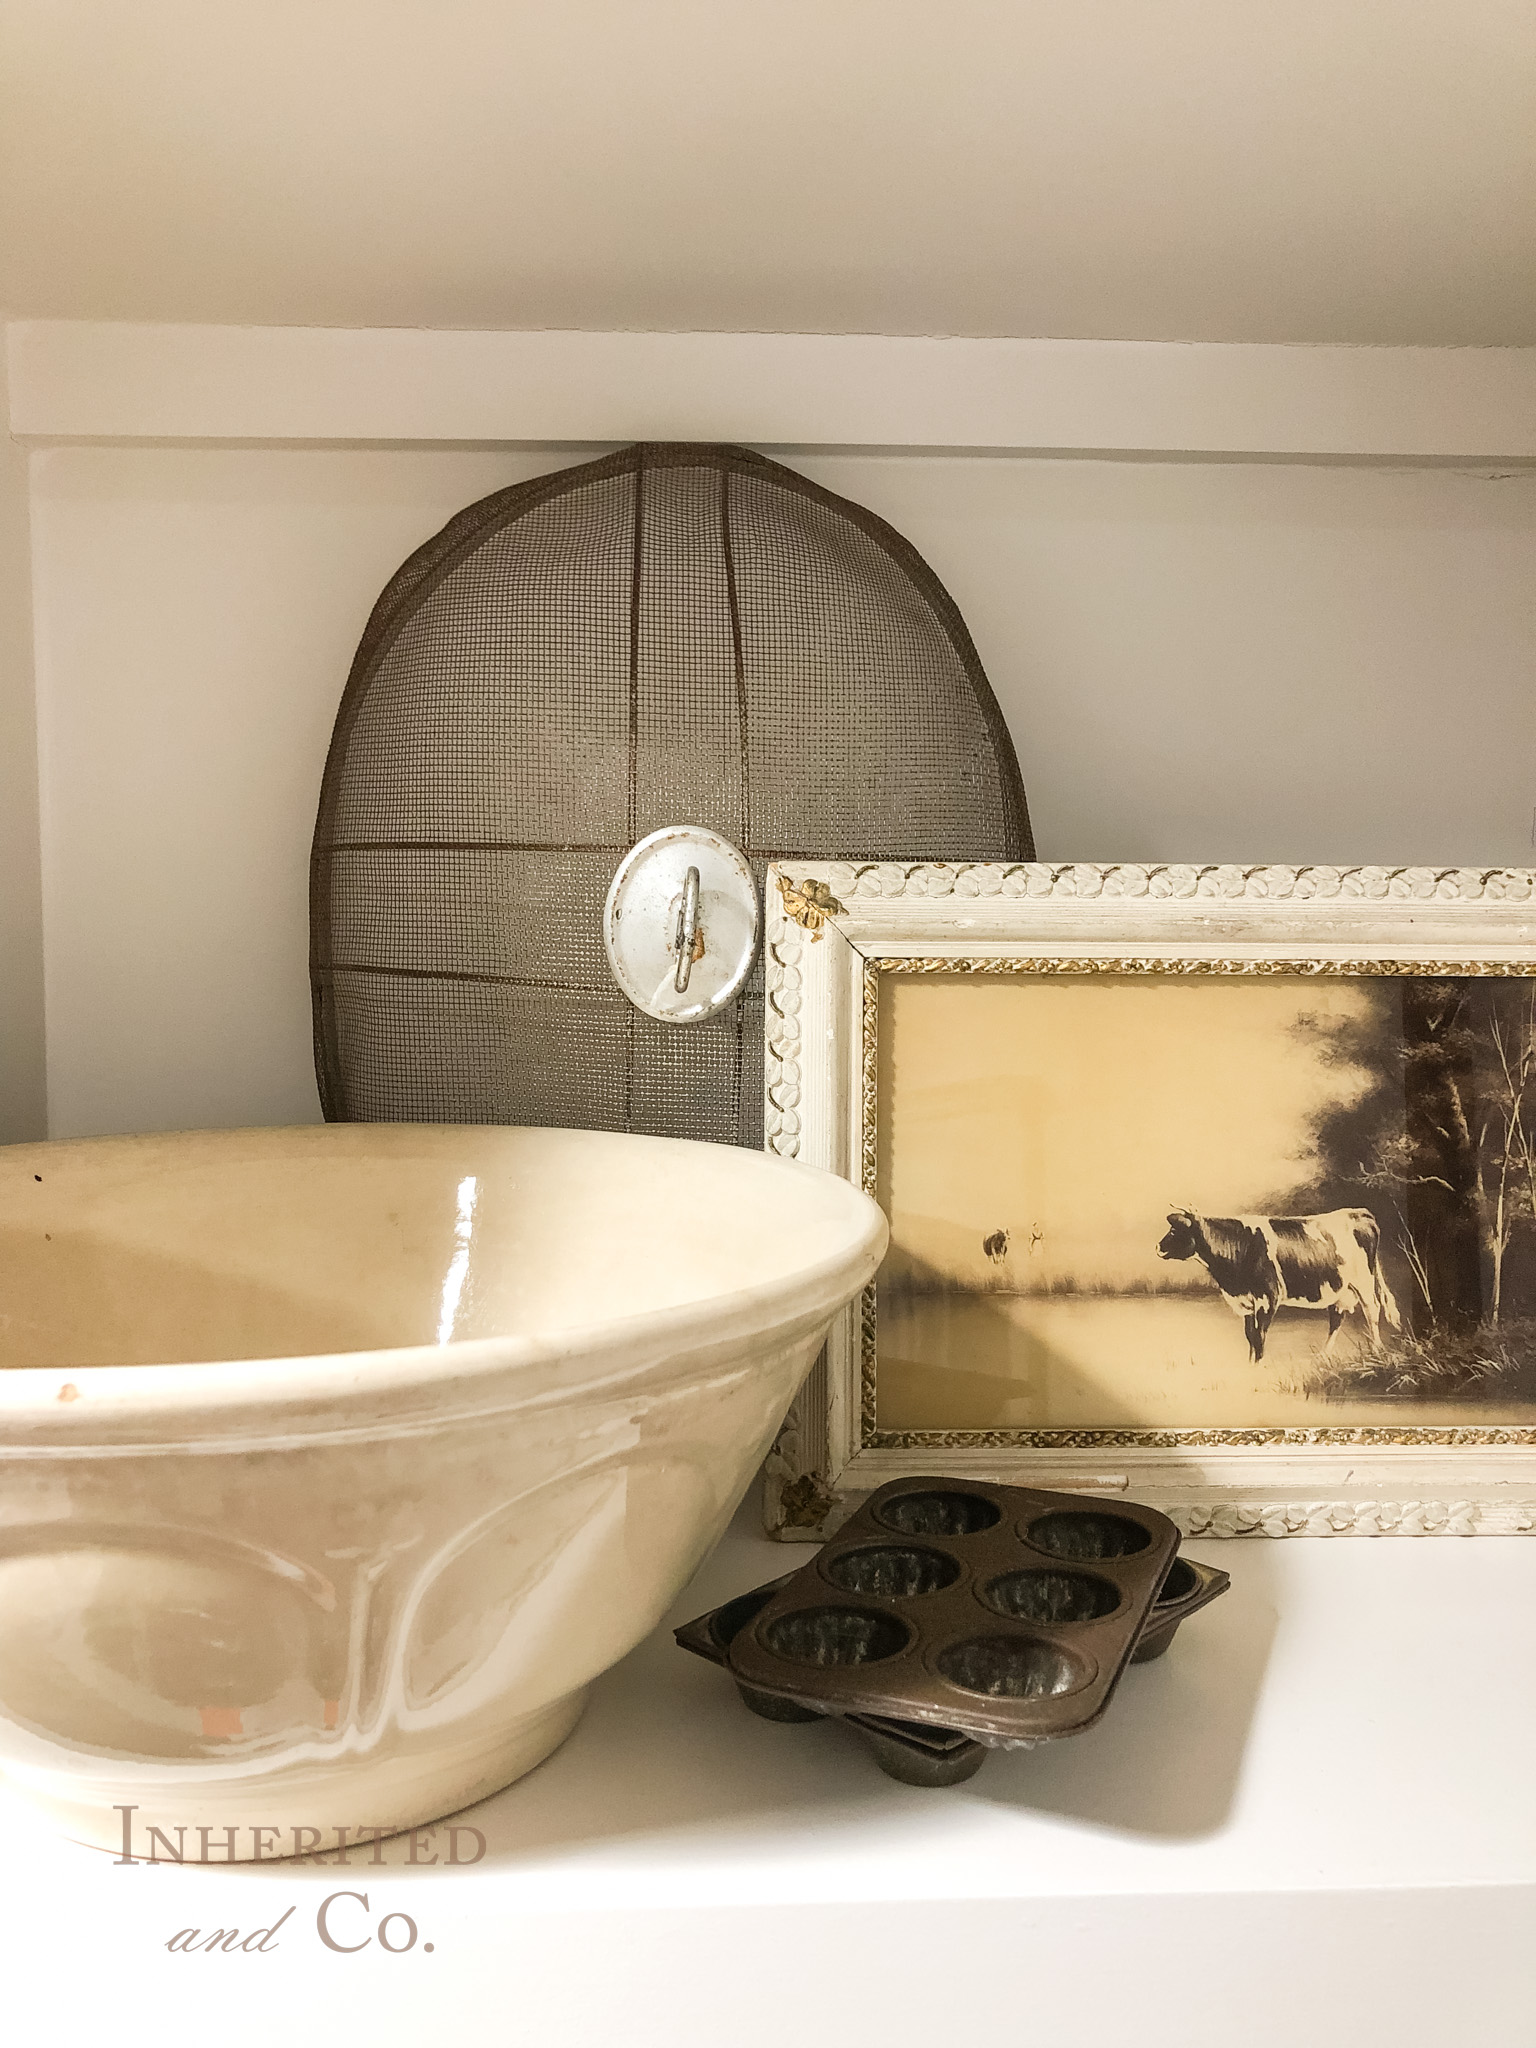 vignette of antiques including an ironstone bowl, baking pans, meat dome, and framed cow print